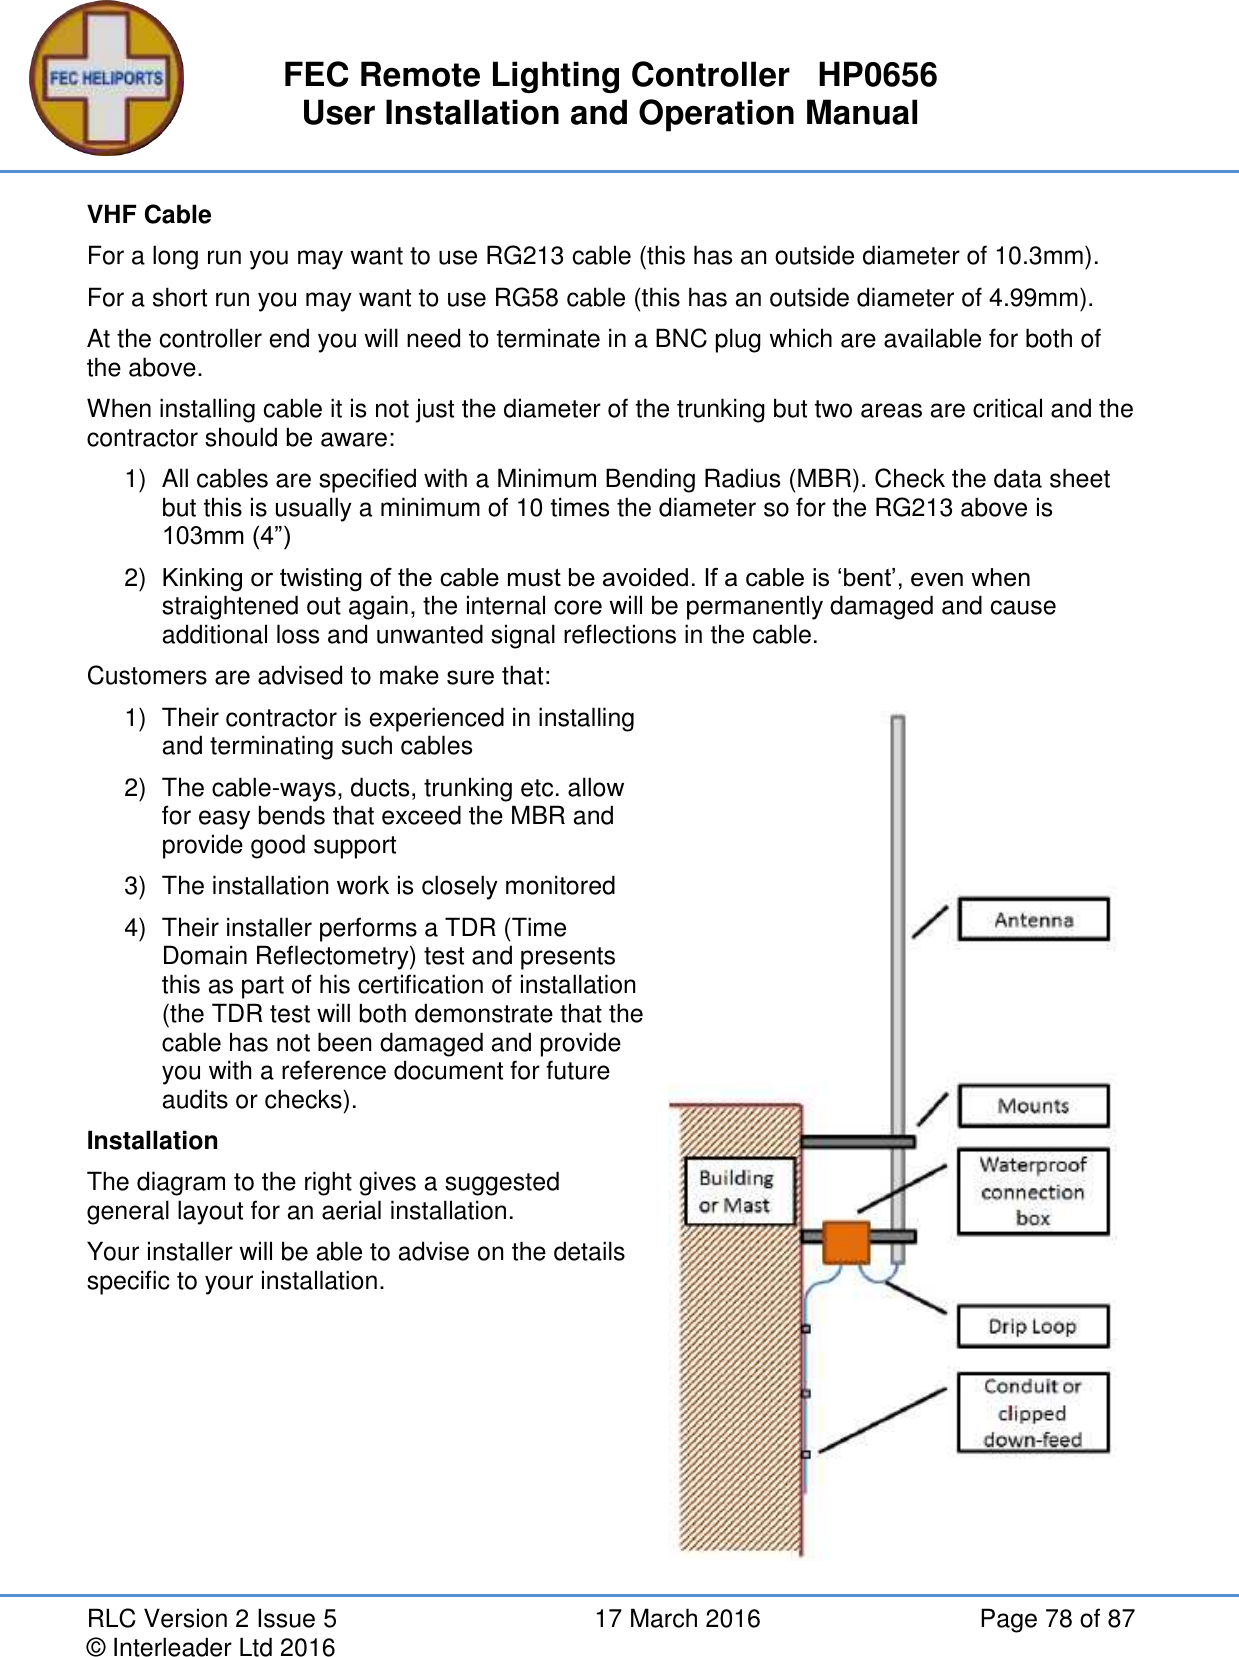 FEC Remote Lighting Controller   HP0656 User Installation and Operation Manual RLC Version 2 Issue 5  17 March 2016  Page 78 of 87 © Interleader Ltd 2016 VHF Cable For a long run you may want to use RG213 cable (this has an outside diameter of 10.3mm). For a short run you may want to use RG58 cable (this has an outside diameter of 4.99mm). At the controller end you will need to terminate in a BNC plug which are available for both of the above. When installing cable it is not just the diameter of the trunking but two areas are critical and the contractor should be aware: 1)  All cables are specified with a Minimum Bending Radius (MBR). Check the data sheet but this is usually a minimum of 10 times the diameter so for the RG213 above is 103mm (4”) 2) Kinking or twisting of the cable must be avoided. If a cable is ‘bent’, even when straightened out again, the internal core will be permanently damaged and cause additional loss and unwanted signal reflections in the cable. Customers are advised to make sure that: 1)  Their contractor is experienced in installing and terminating such cables 2)  The cable-ways, ducts, trunking etc. allow for easy bends that exceed the MBR and provide good support 3)  The installation work is closely monitored 4)  Their installer performs a TDR (Time Domain Reflectometry) test and presents this as part of his certification of installation (the TDR test will both demonstrate that the cable has not been damaged and provide you with a reference document for future audits or checks). Installation The diagram to the right gives a suggested general layout for an aerial installation. Your installer will be able to advise on the details specific to your installation.   